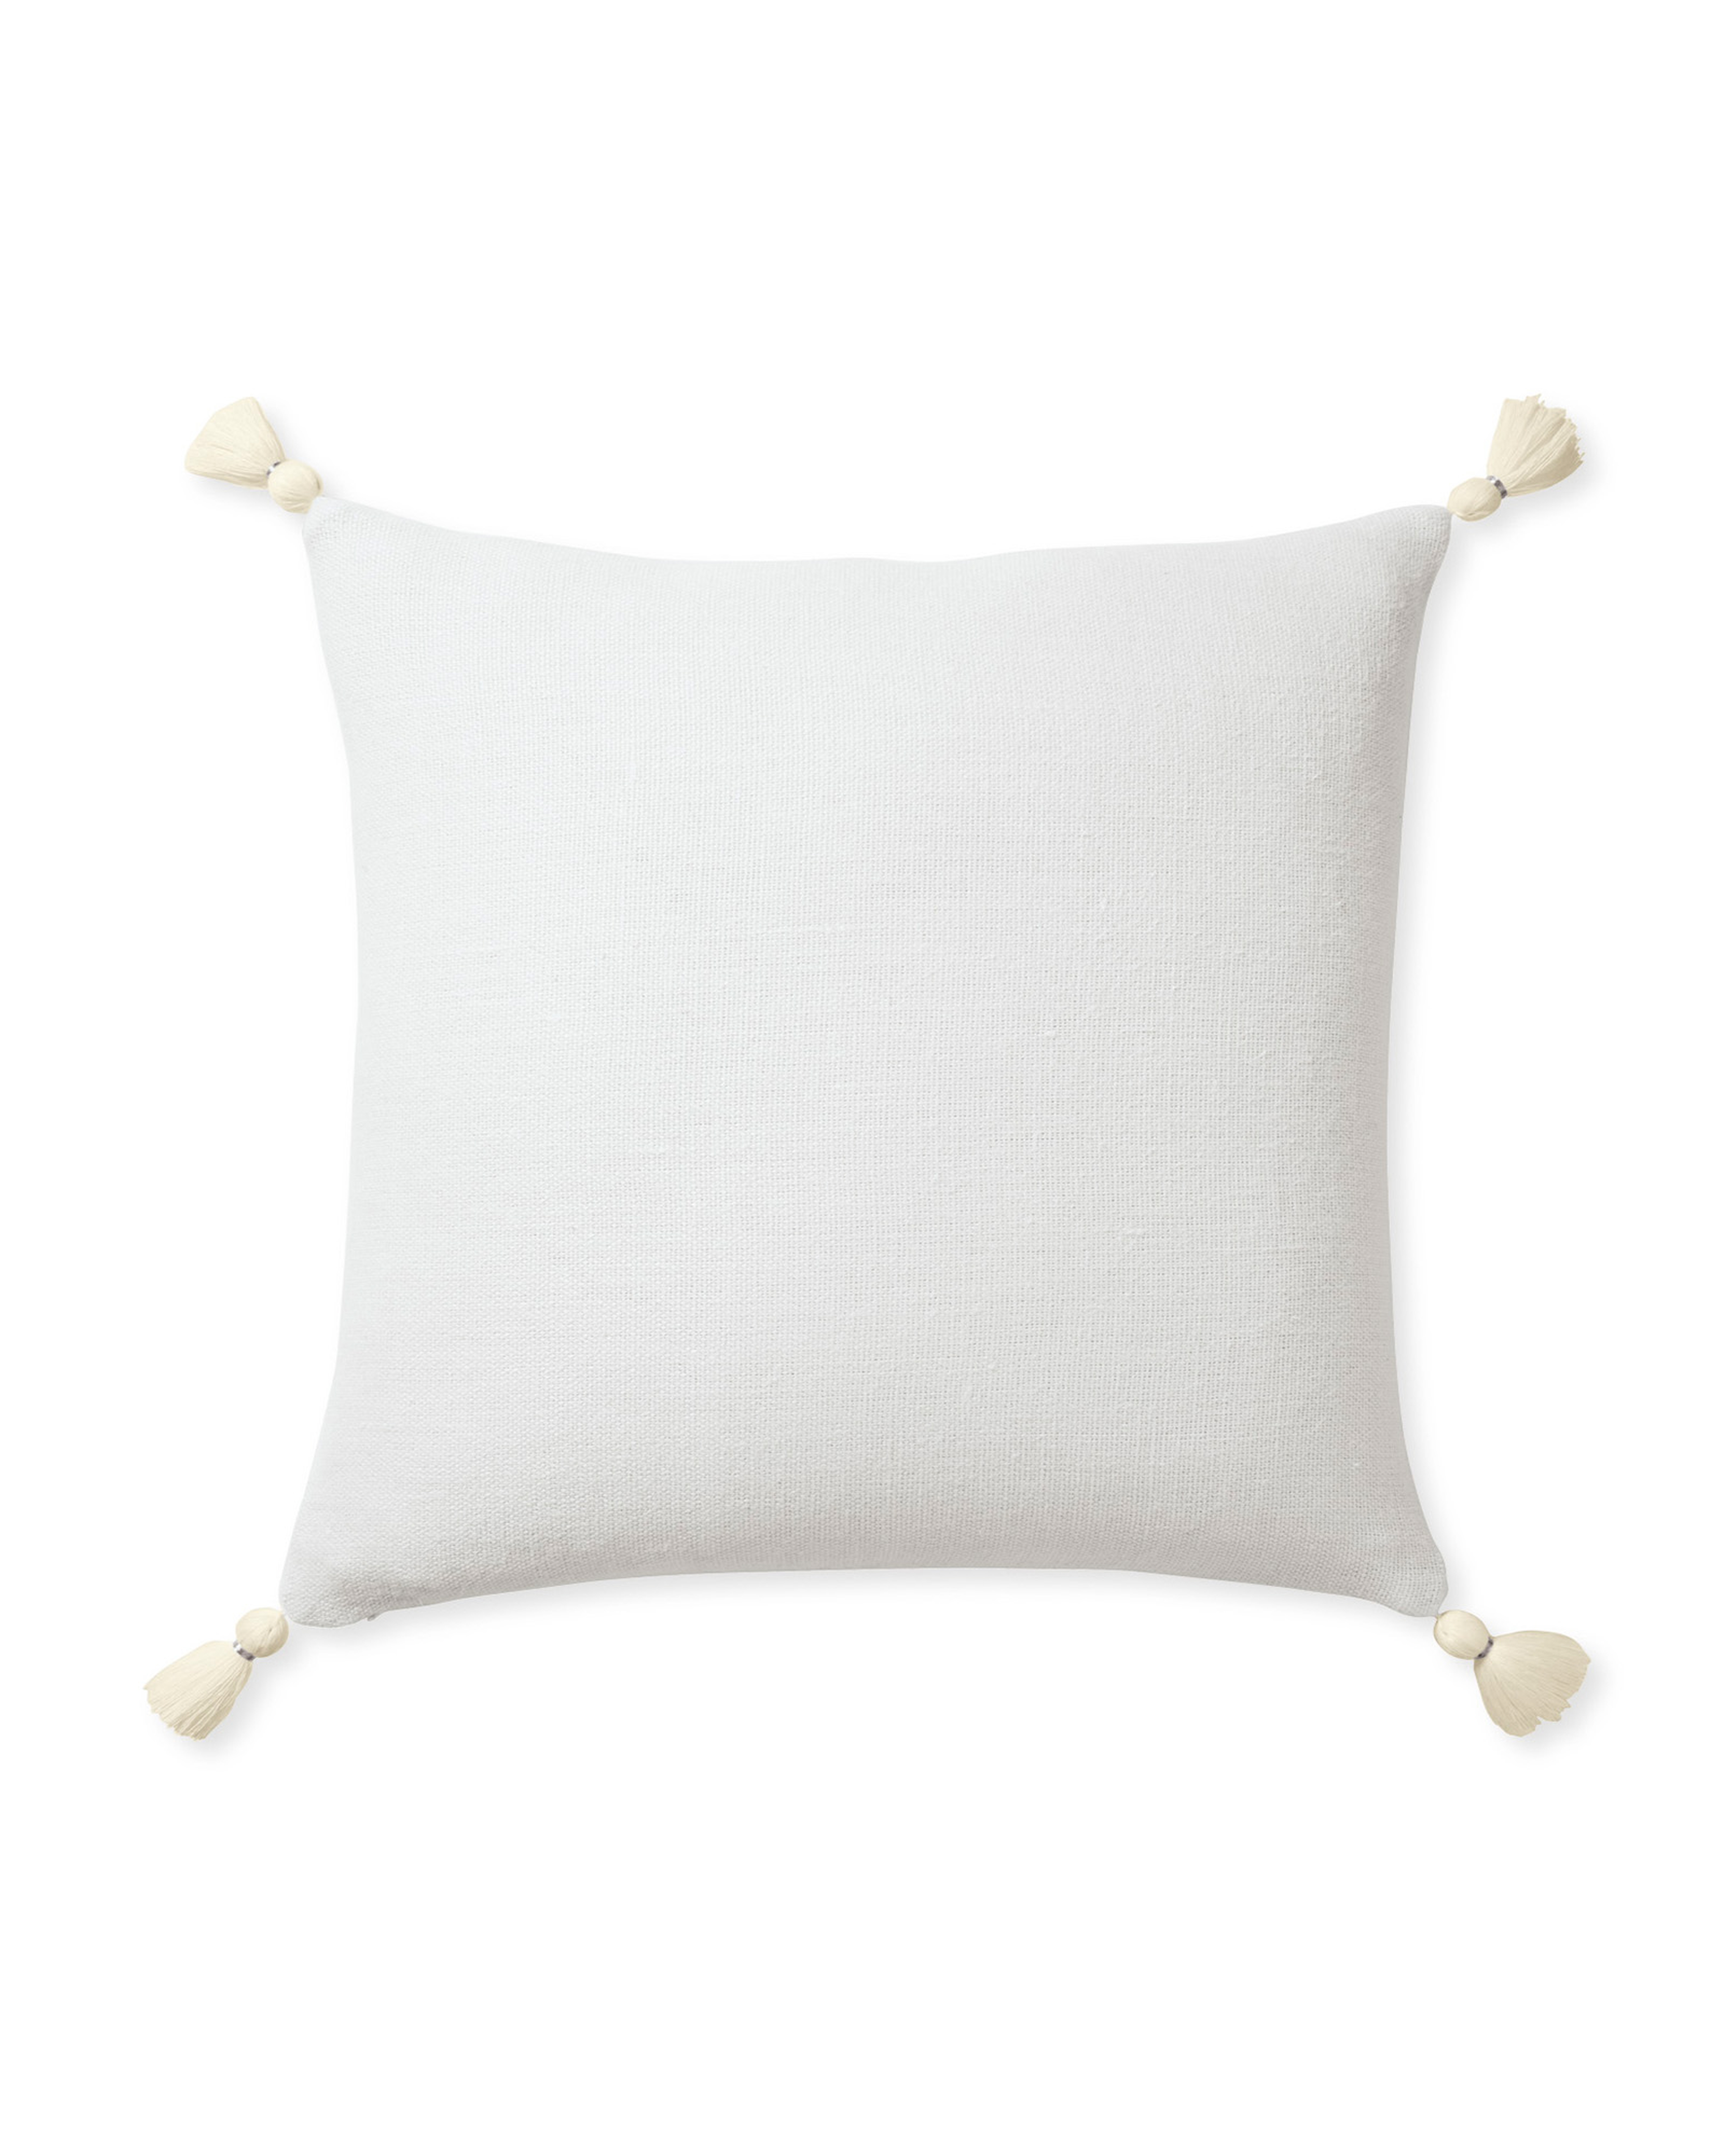 Eva Tassel 20" SQ Pillow Cover - White - Insert sold separately - Serena and Lily